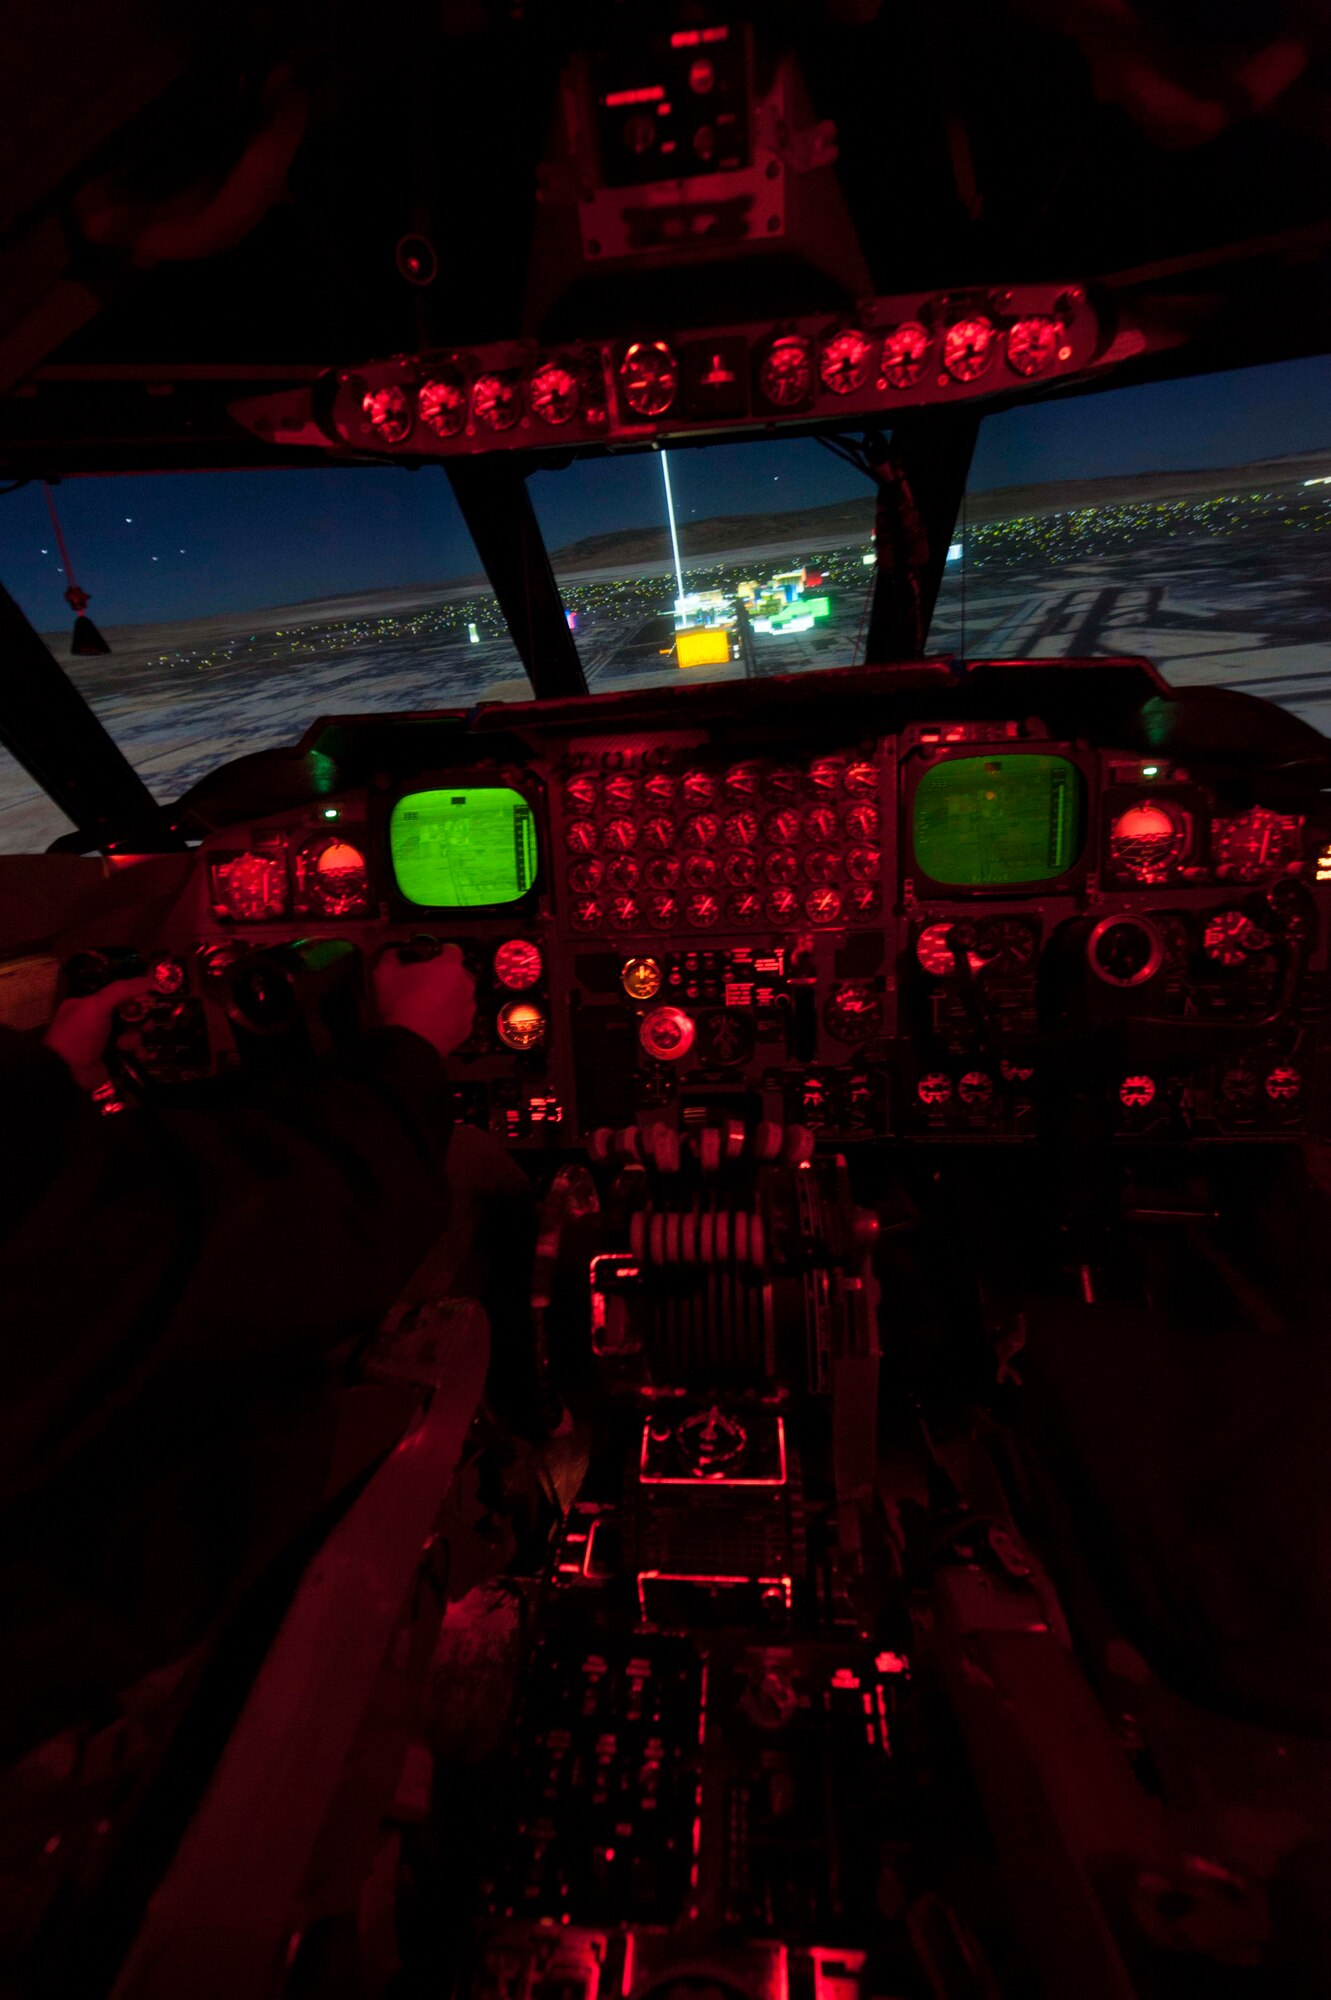 A simulation of the Las Vegas strip is viewed from the cockpit of the B52-H Stratofortress weapons system trainer during a simulated flight on Minot Air Force Base, N.D., Dec. 3, 2014. The WST conducts two large force exercises per week in addition to virtual flag exercises that last nine days and consist of five missions. They also partner with Airborne Warning and Control Squadrons, River Joints who identify ground threats and radars and tactical air control parties. (U.S. Air Force photo/Senior Airman Stephanie Morris)